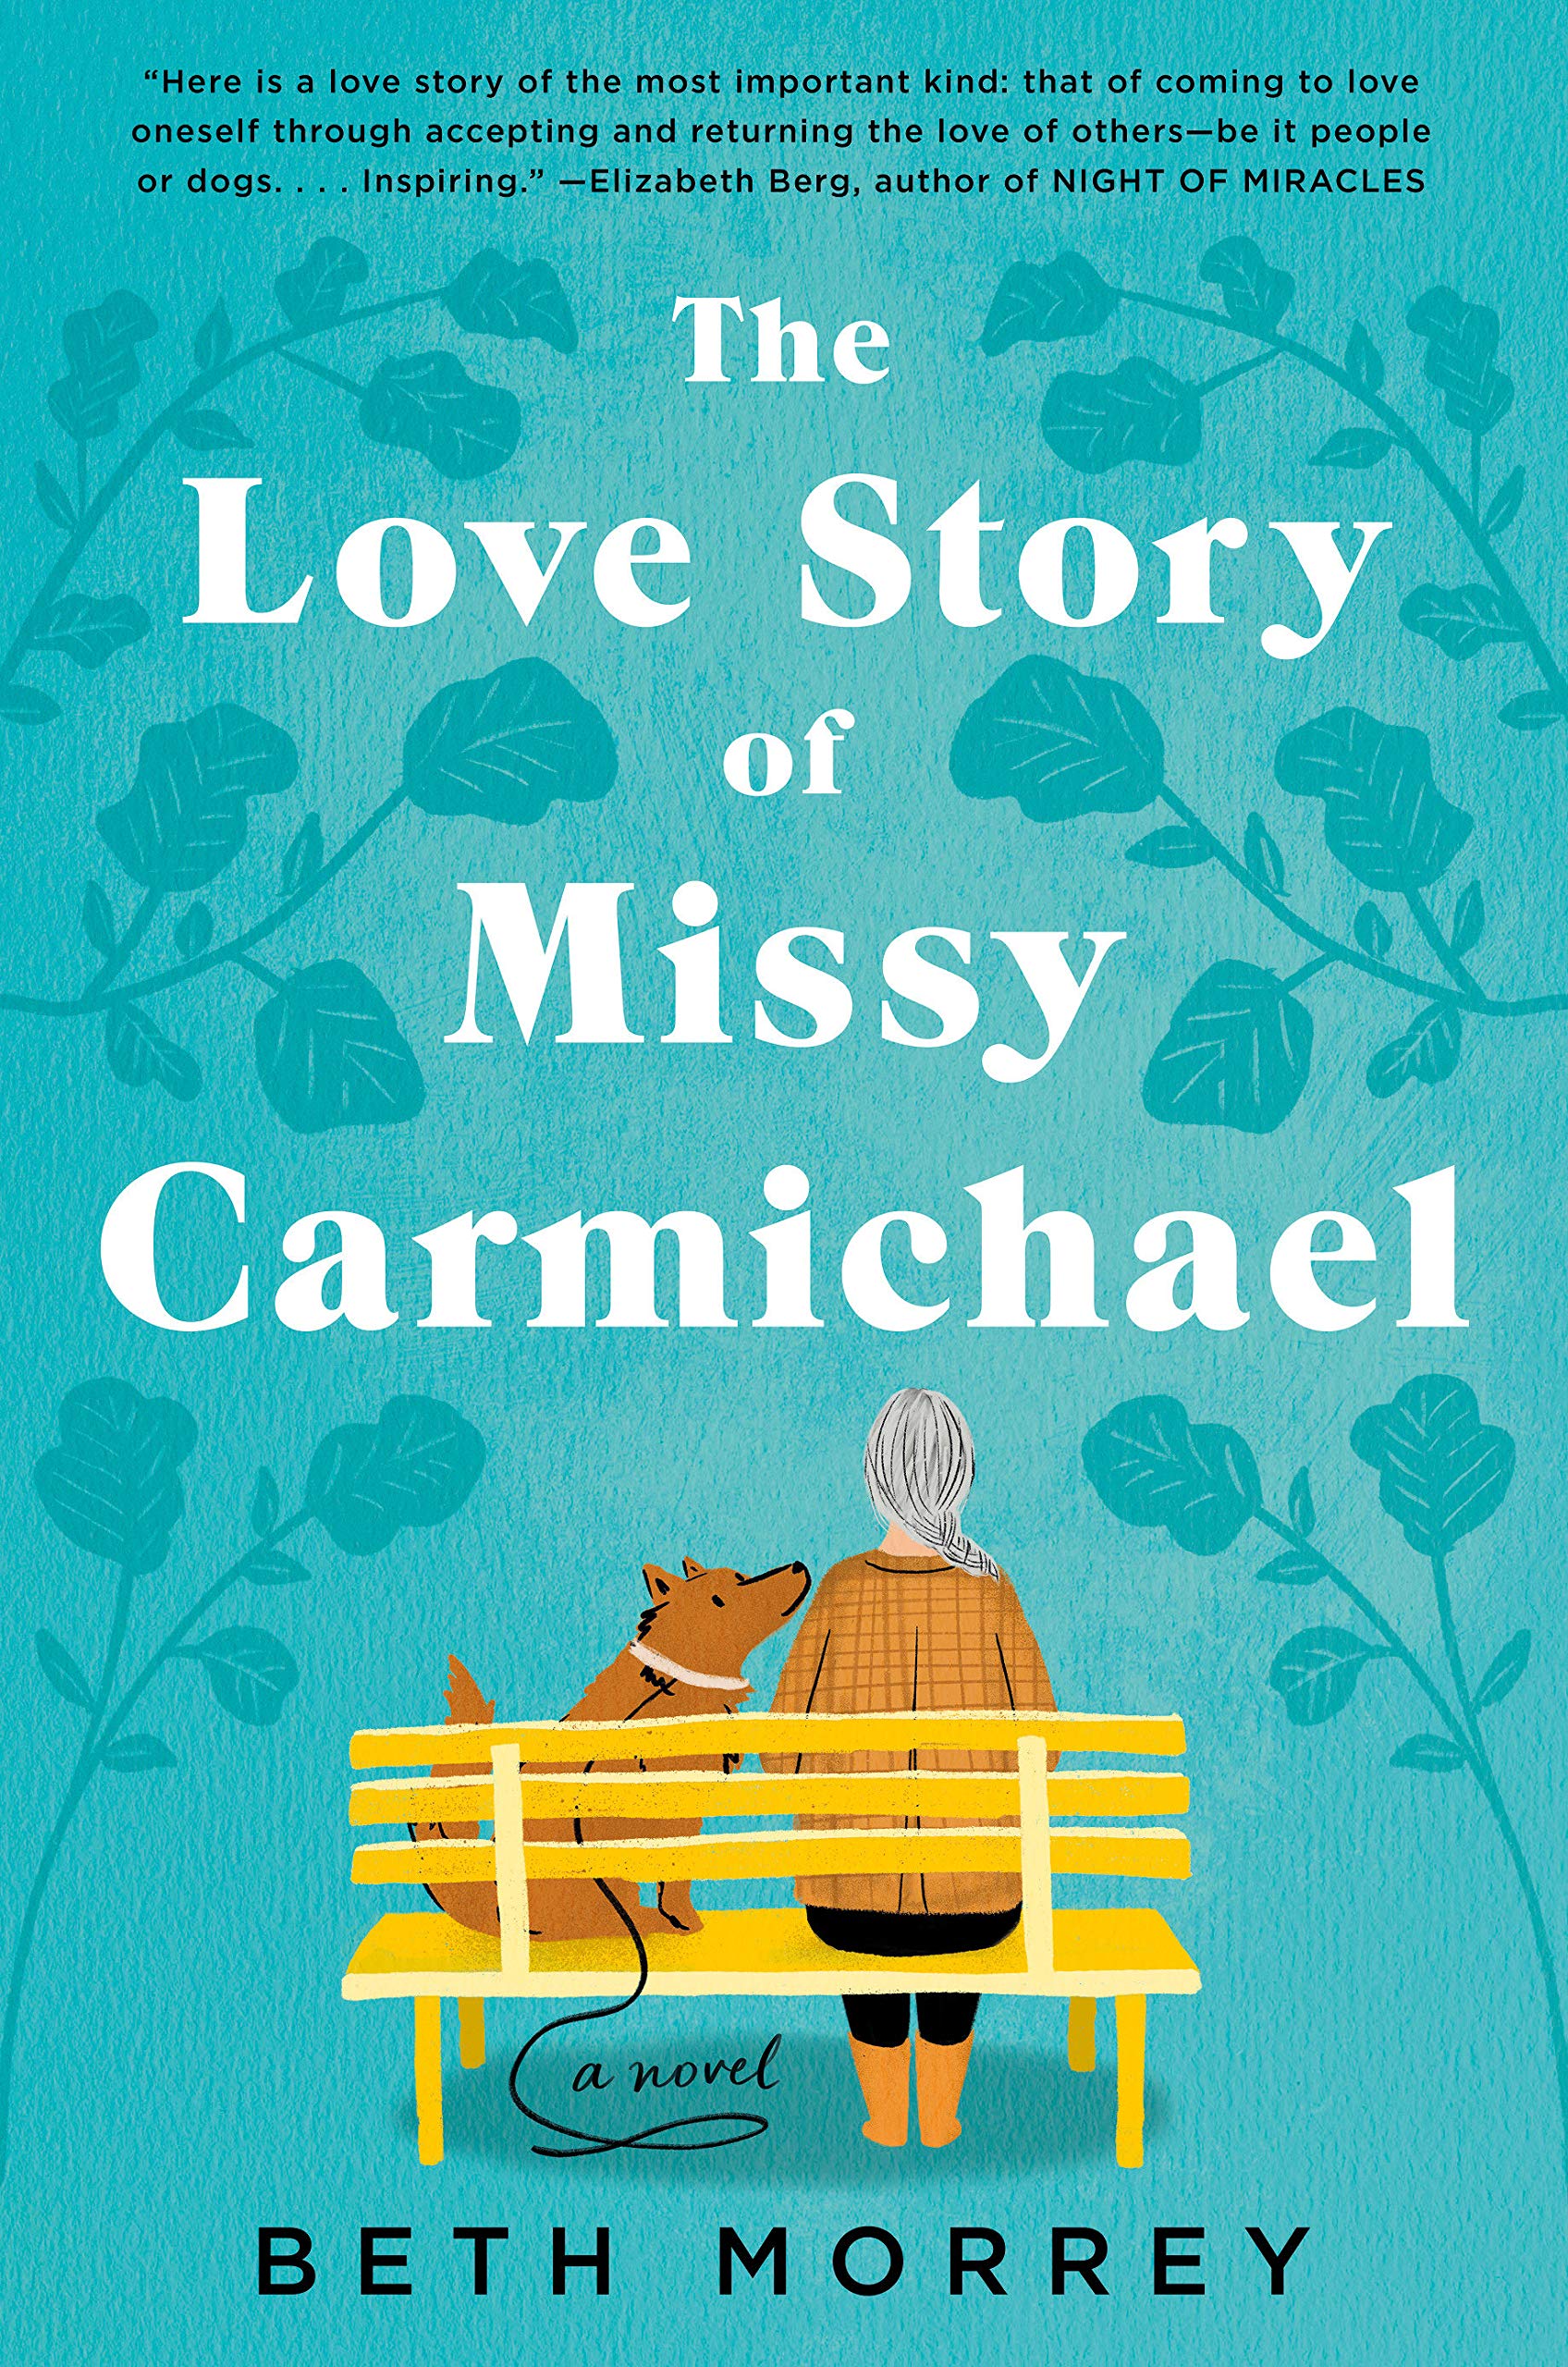 Image for "The Love Story of Missy Carmichael"